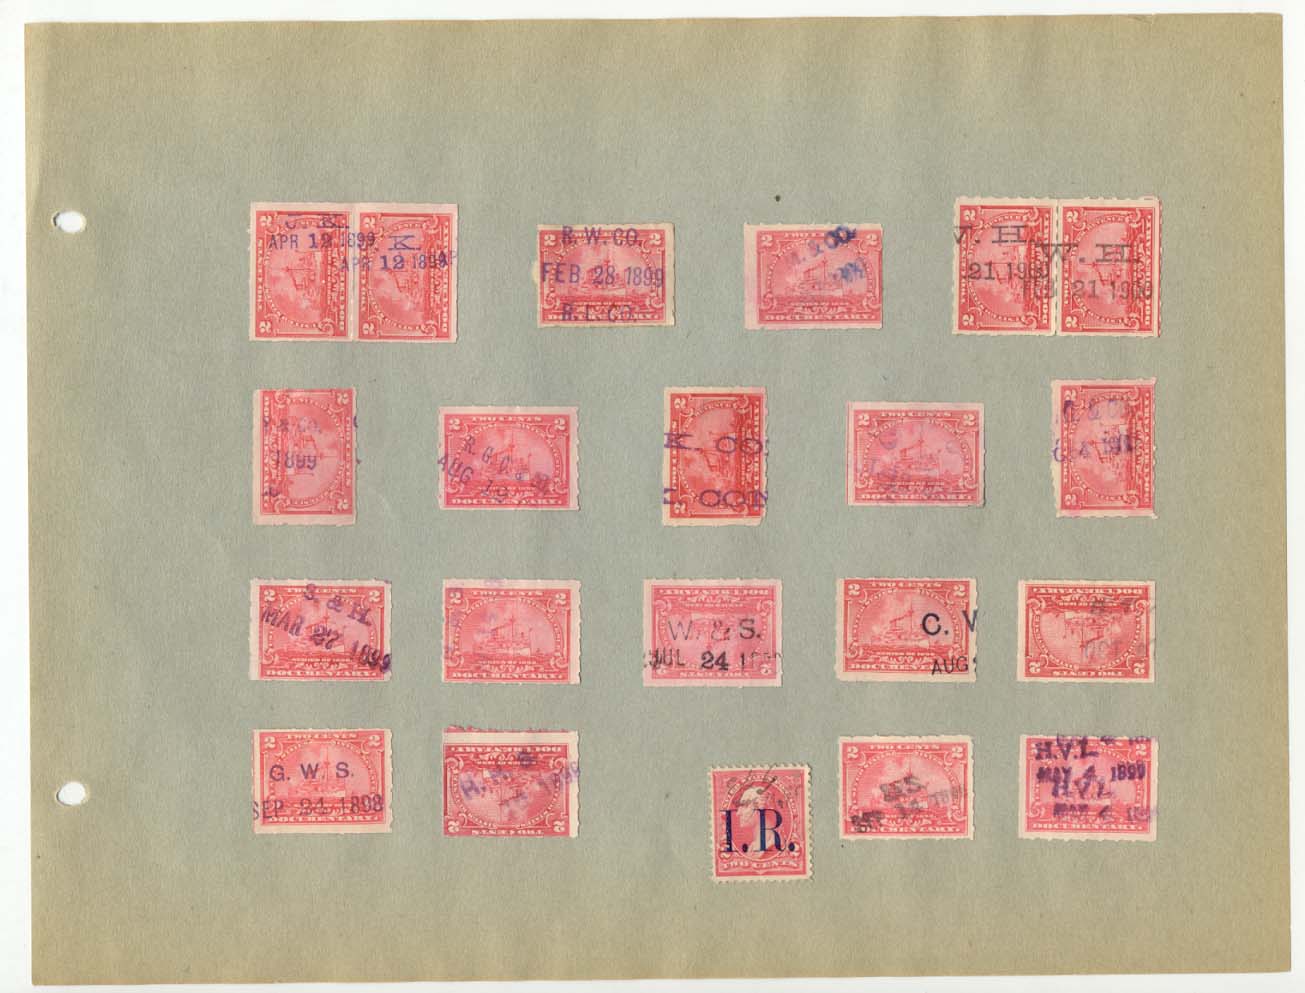 Extra Dated Revenue Stamps